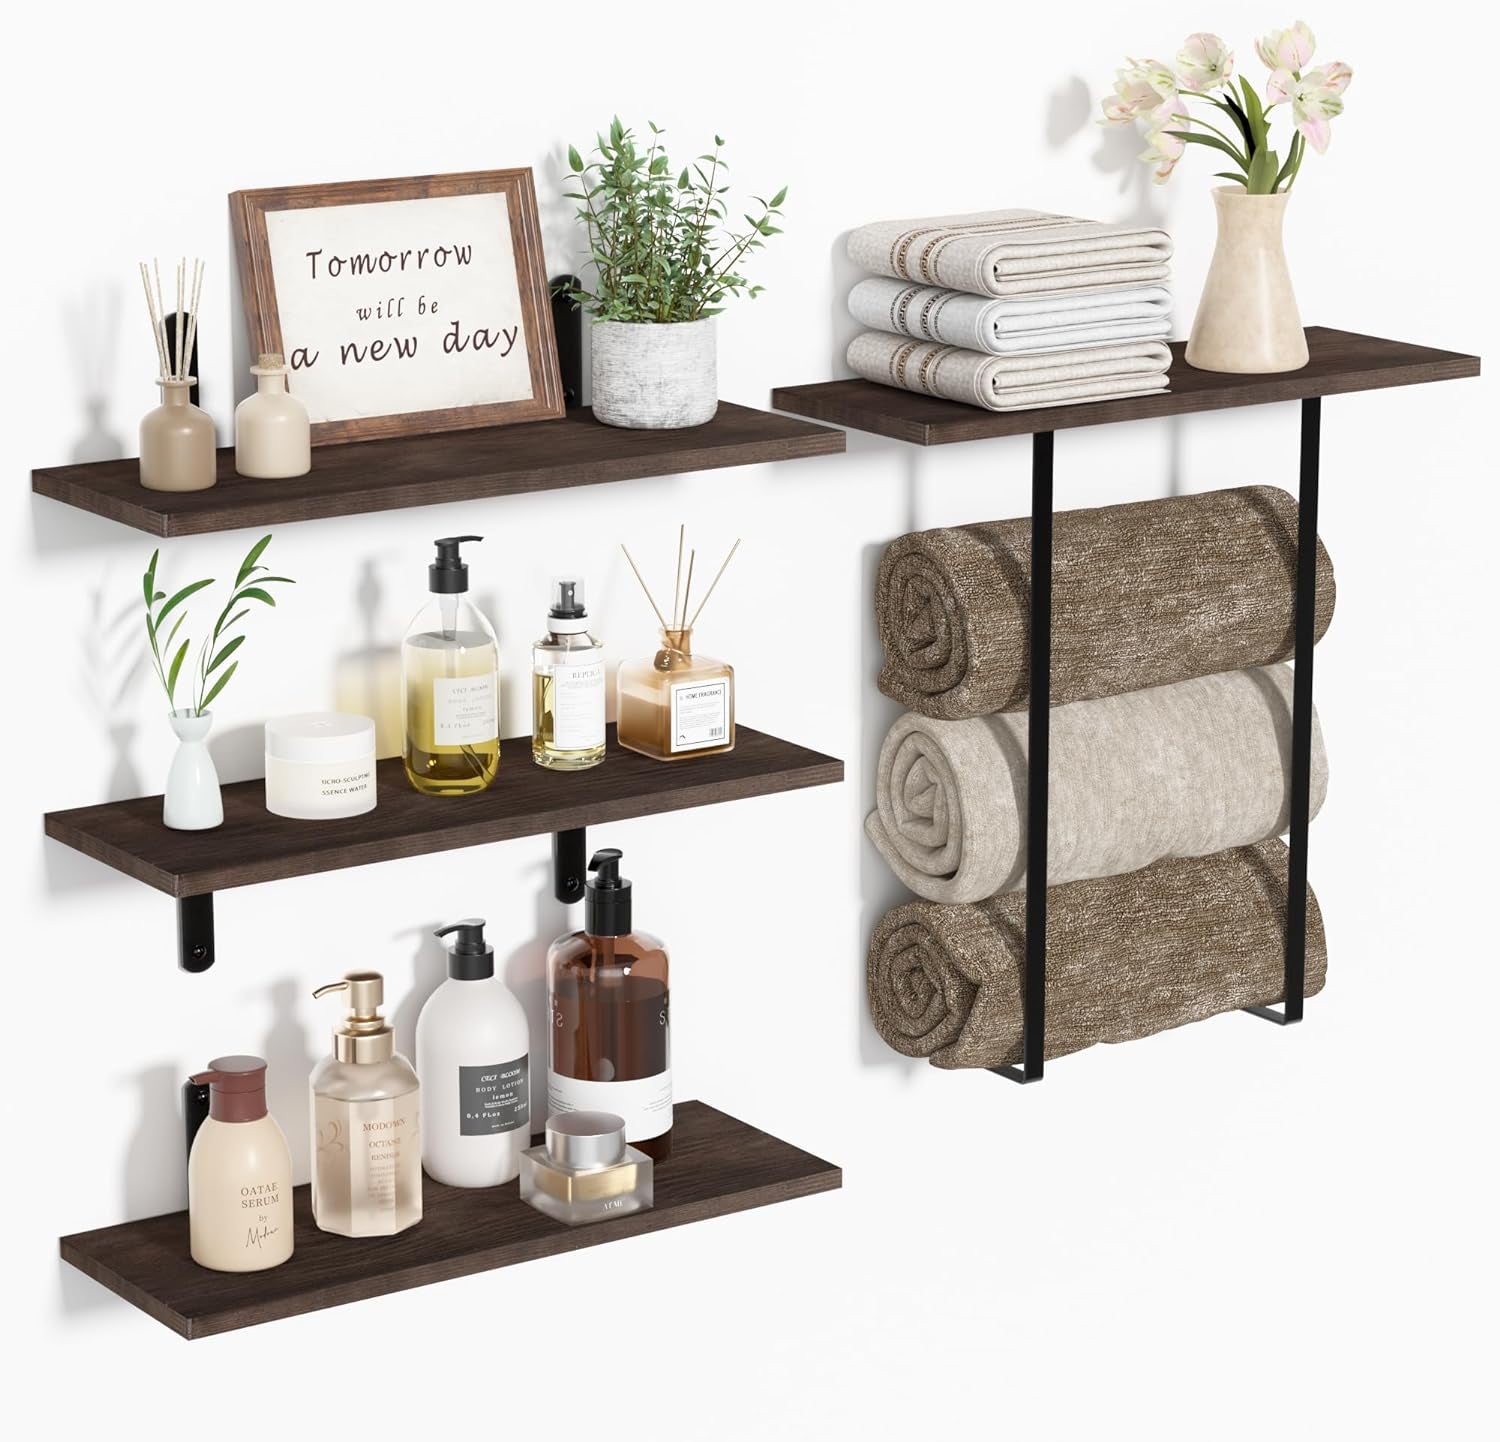 Bathroom Shelves over Toilet, 3+1 Tier Floating Shelves, Dark Brown Wooden Storage Wall Shelves with Towel Rack, Wall Mounted Hanging Shelf for Bedroom, Kitchen, Living Room, Laundry Décor